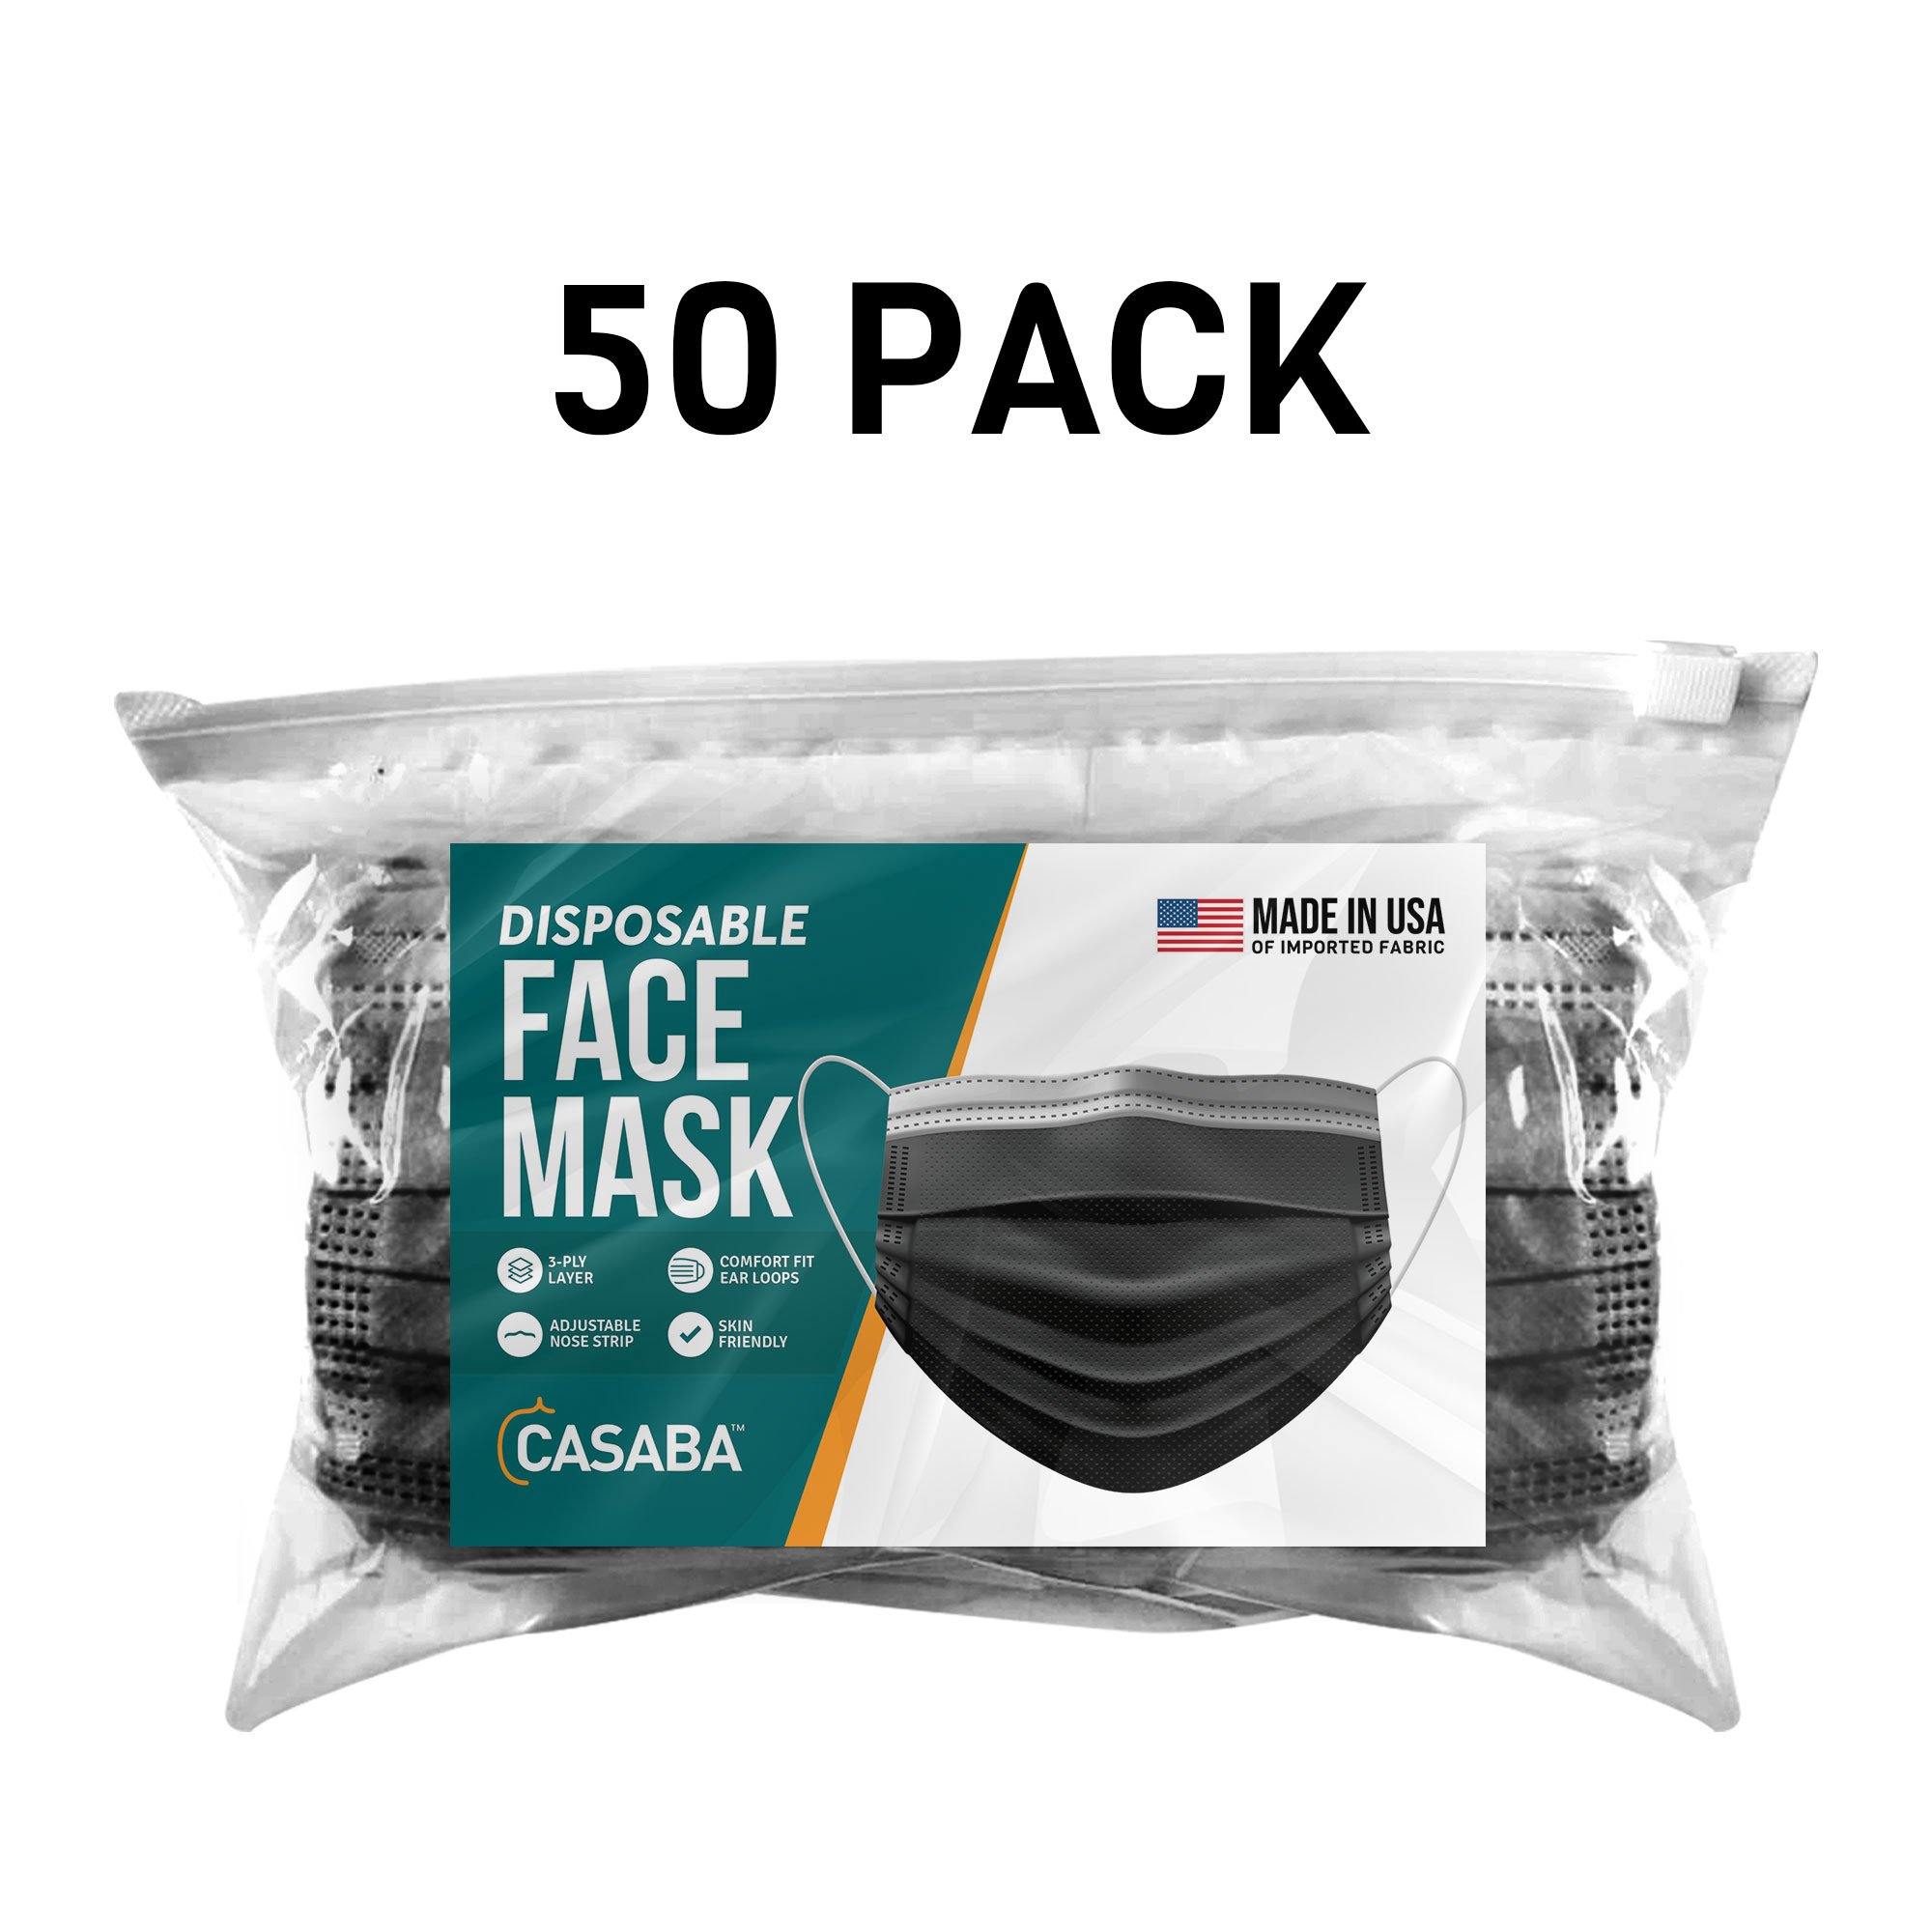 Casaba 50 Pack Black Disposable Face Masks 3-Ply Filter - Made in USA with Imported Fabric